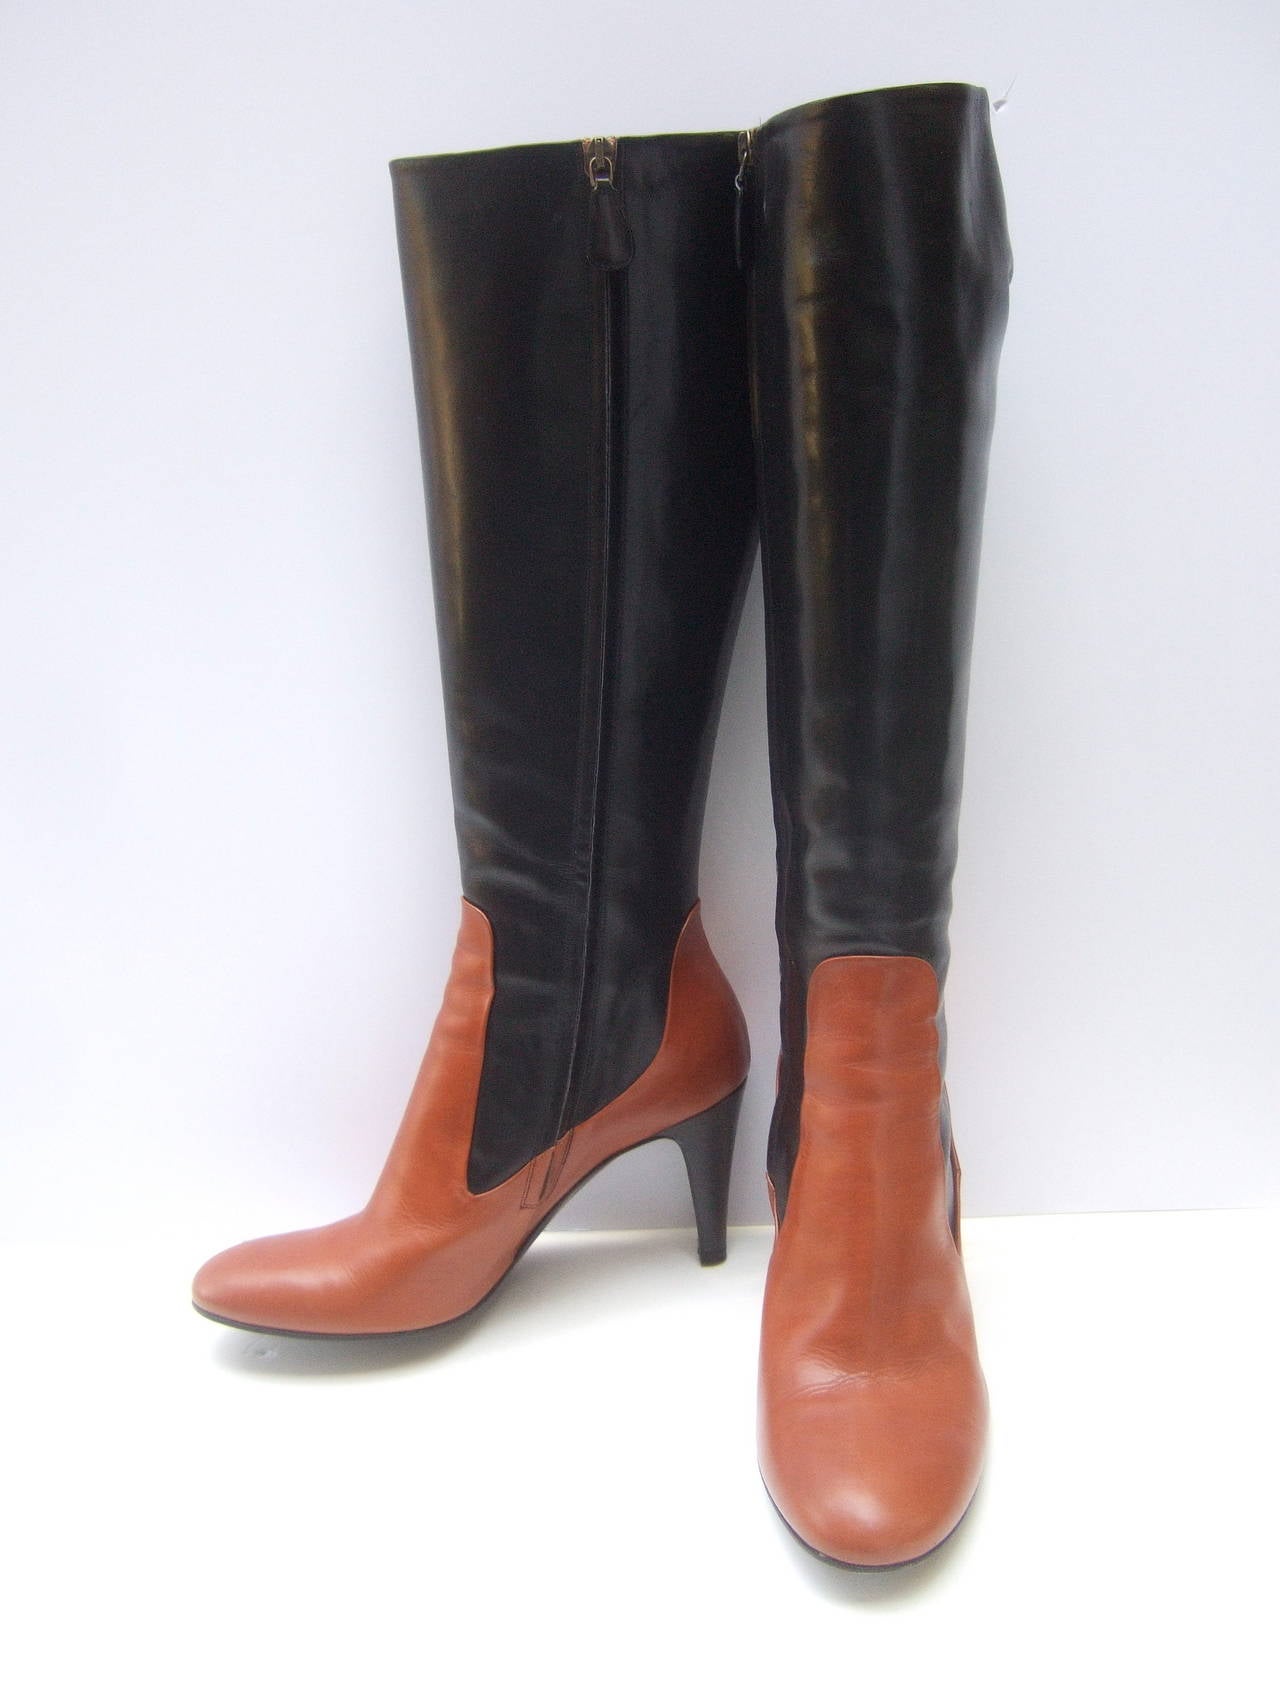 Women's Alexander McQueen Black & Brown Leather Boots Made in Italy Size 39.5